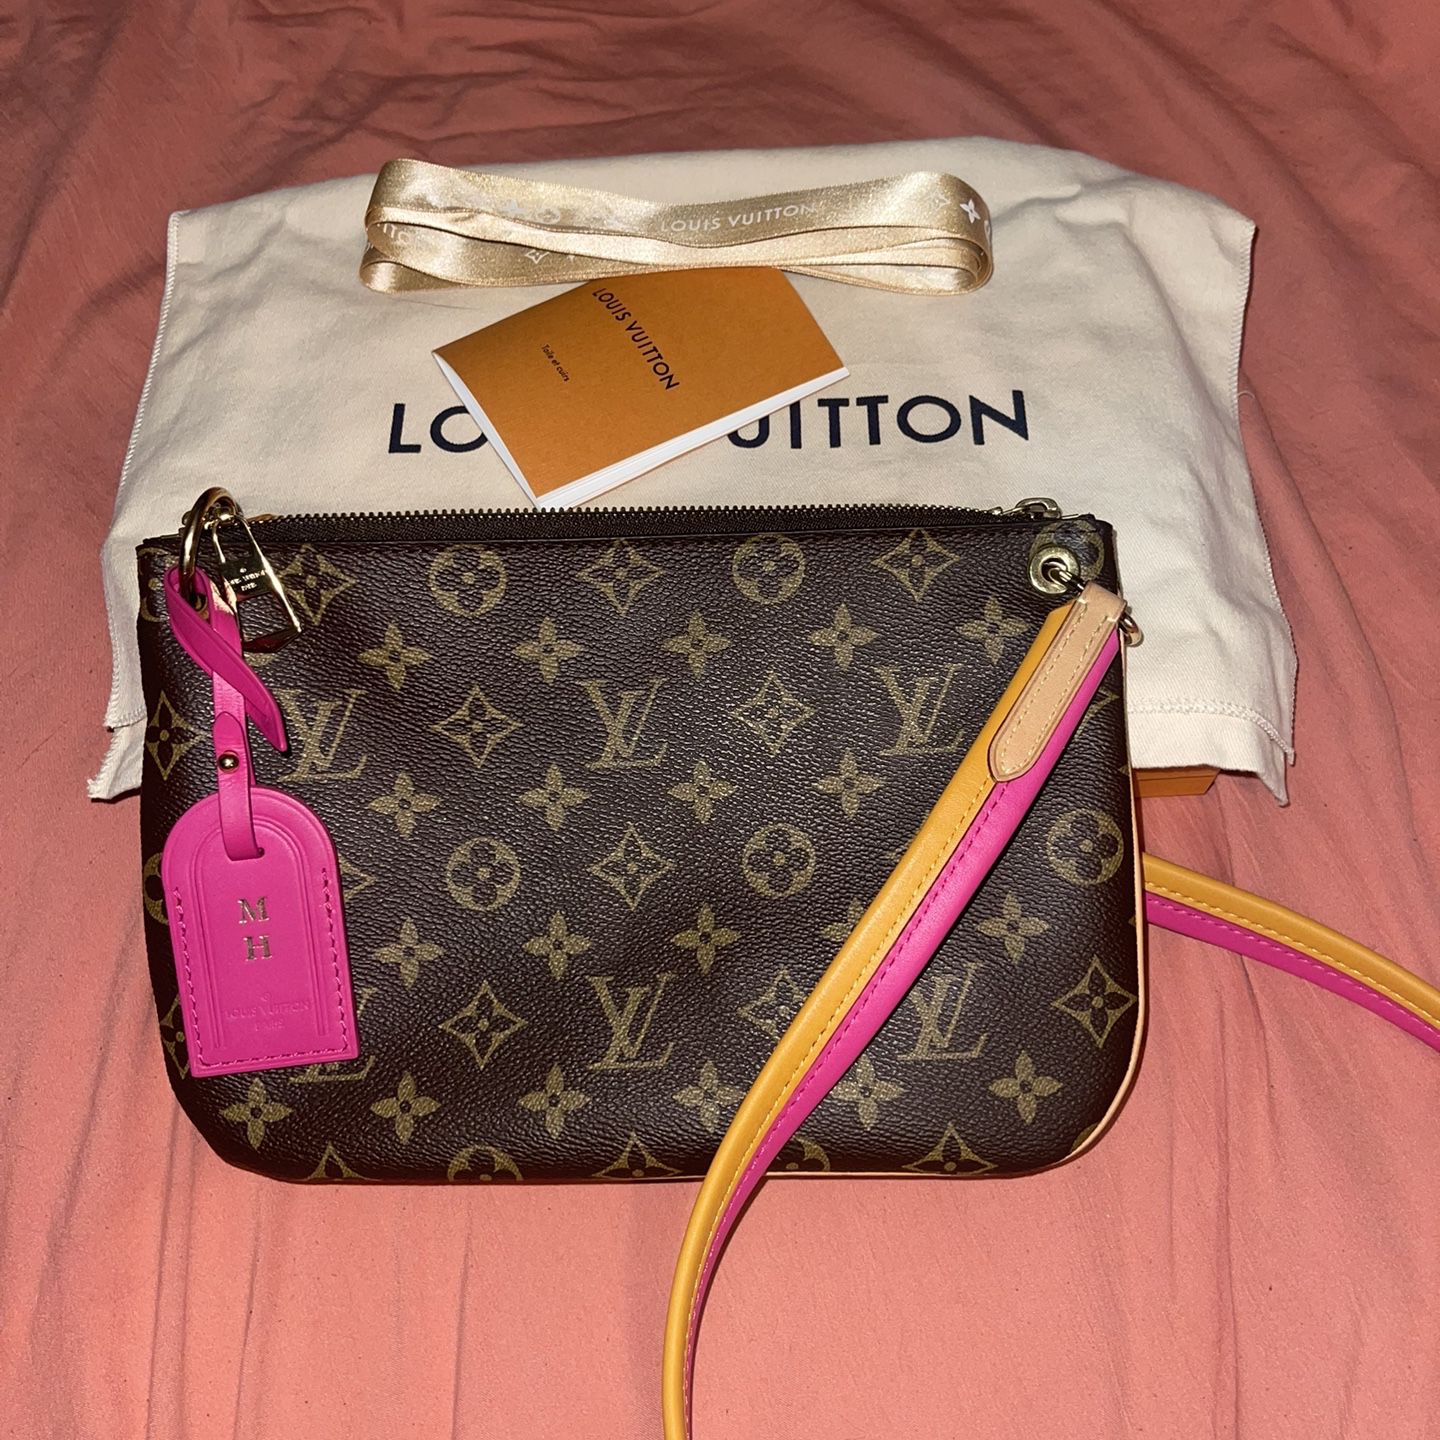 Louis Vuitton Crossbody Bag for Sale in Palmyra, PA - OfferUp